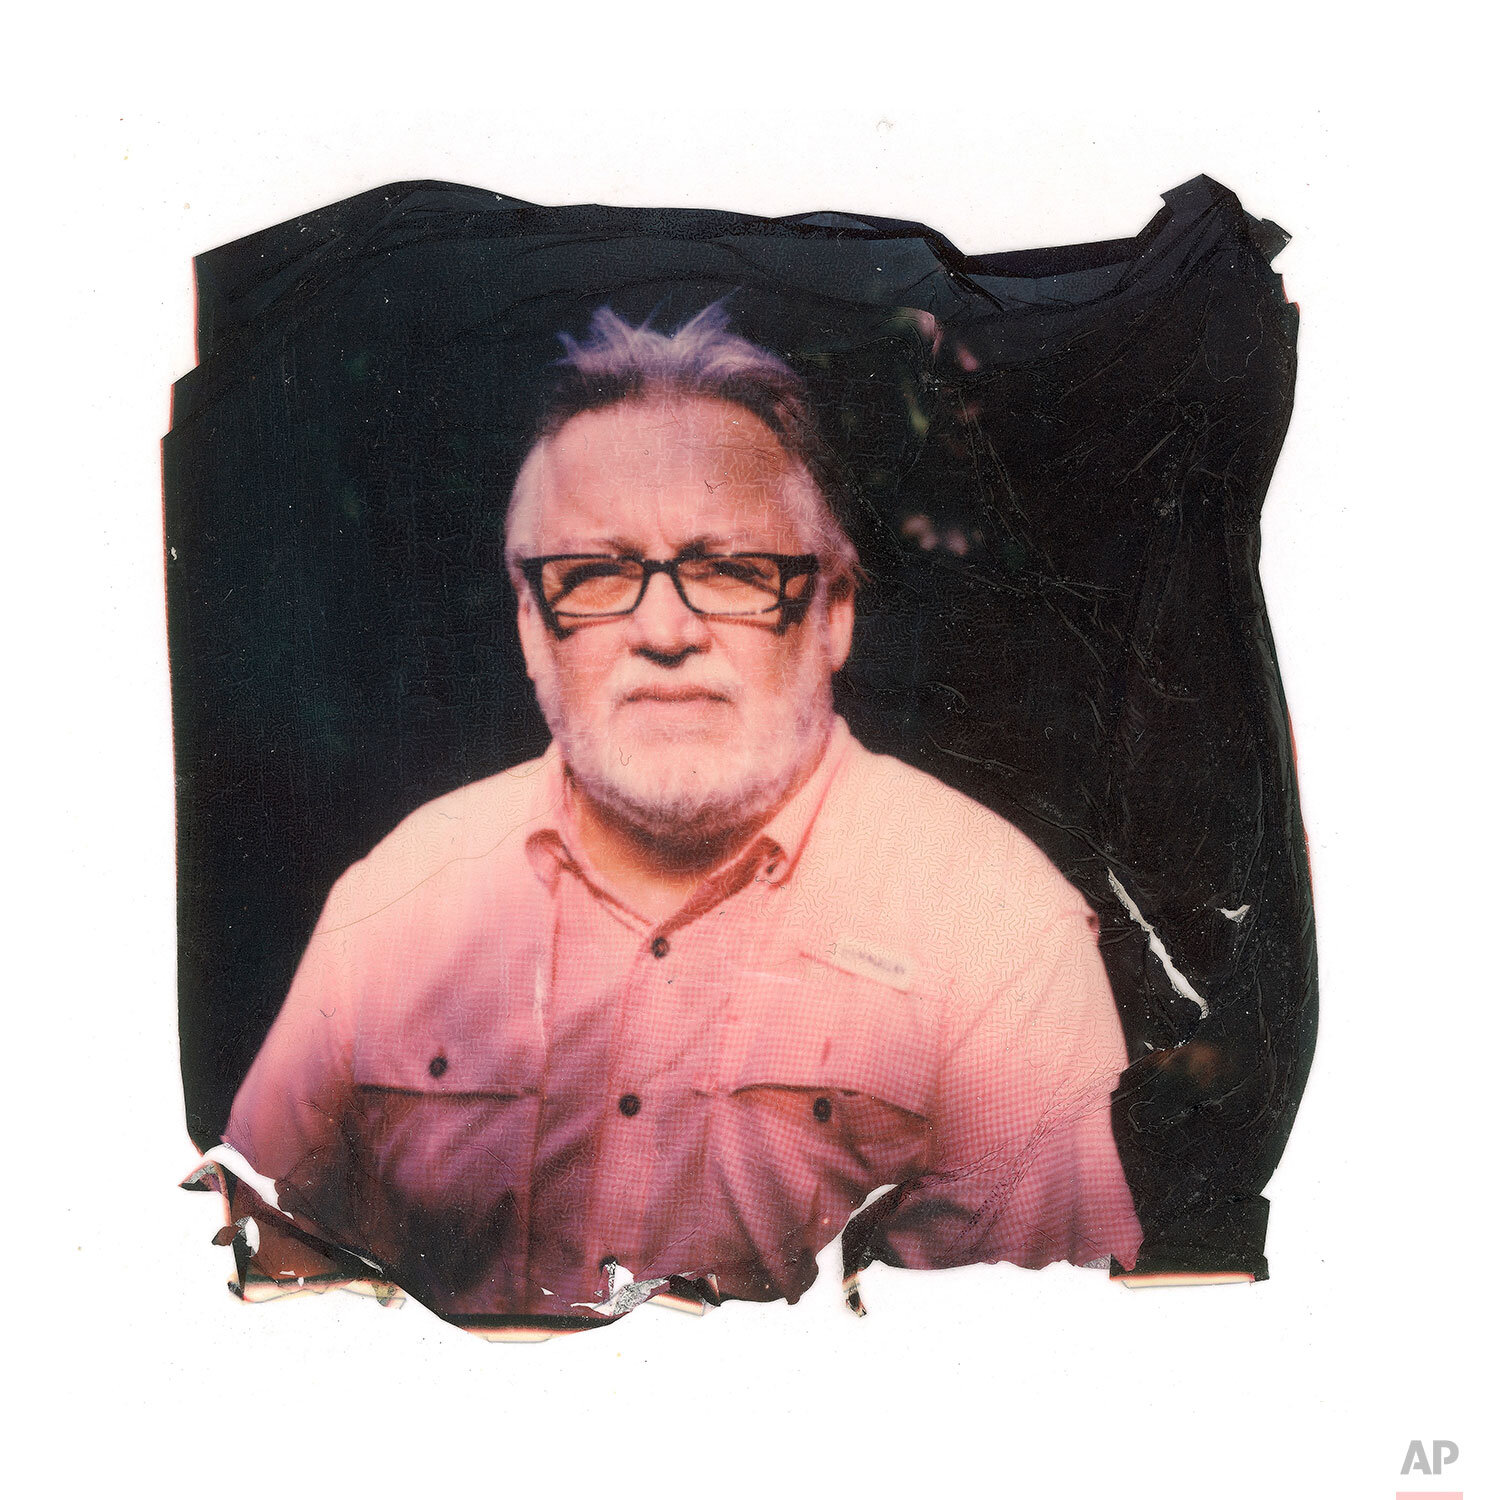  In this image made from a Polaroid emulsion transfer, Mark Belenchia, 64, poses for a portrait in his garden on Monday, June 10, 2019, in Jackson, MS.. Belenchia, a clergy abuse survivor has found meaning in activism. (AP Photo/Wong Maye-E) 